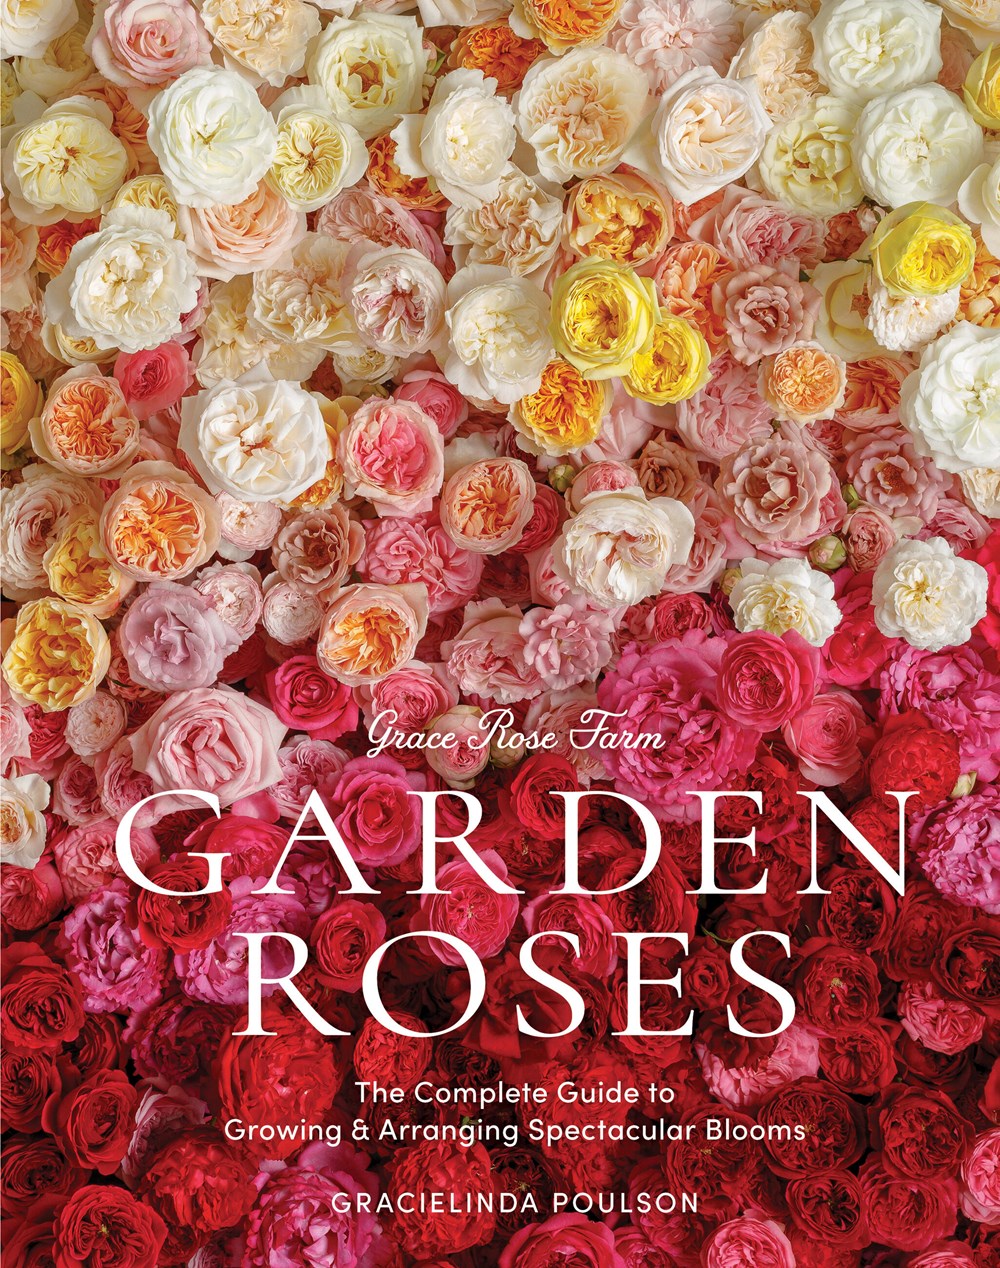 Grace Rose Farm Garden Roses: The Complete Guide to Growing & Arranging Spectacular Blooms